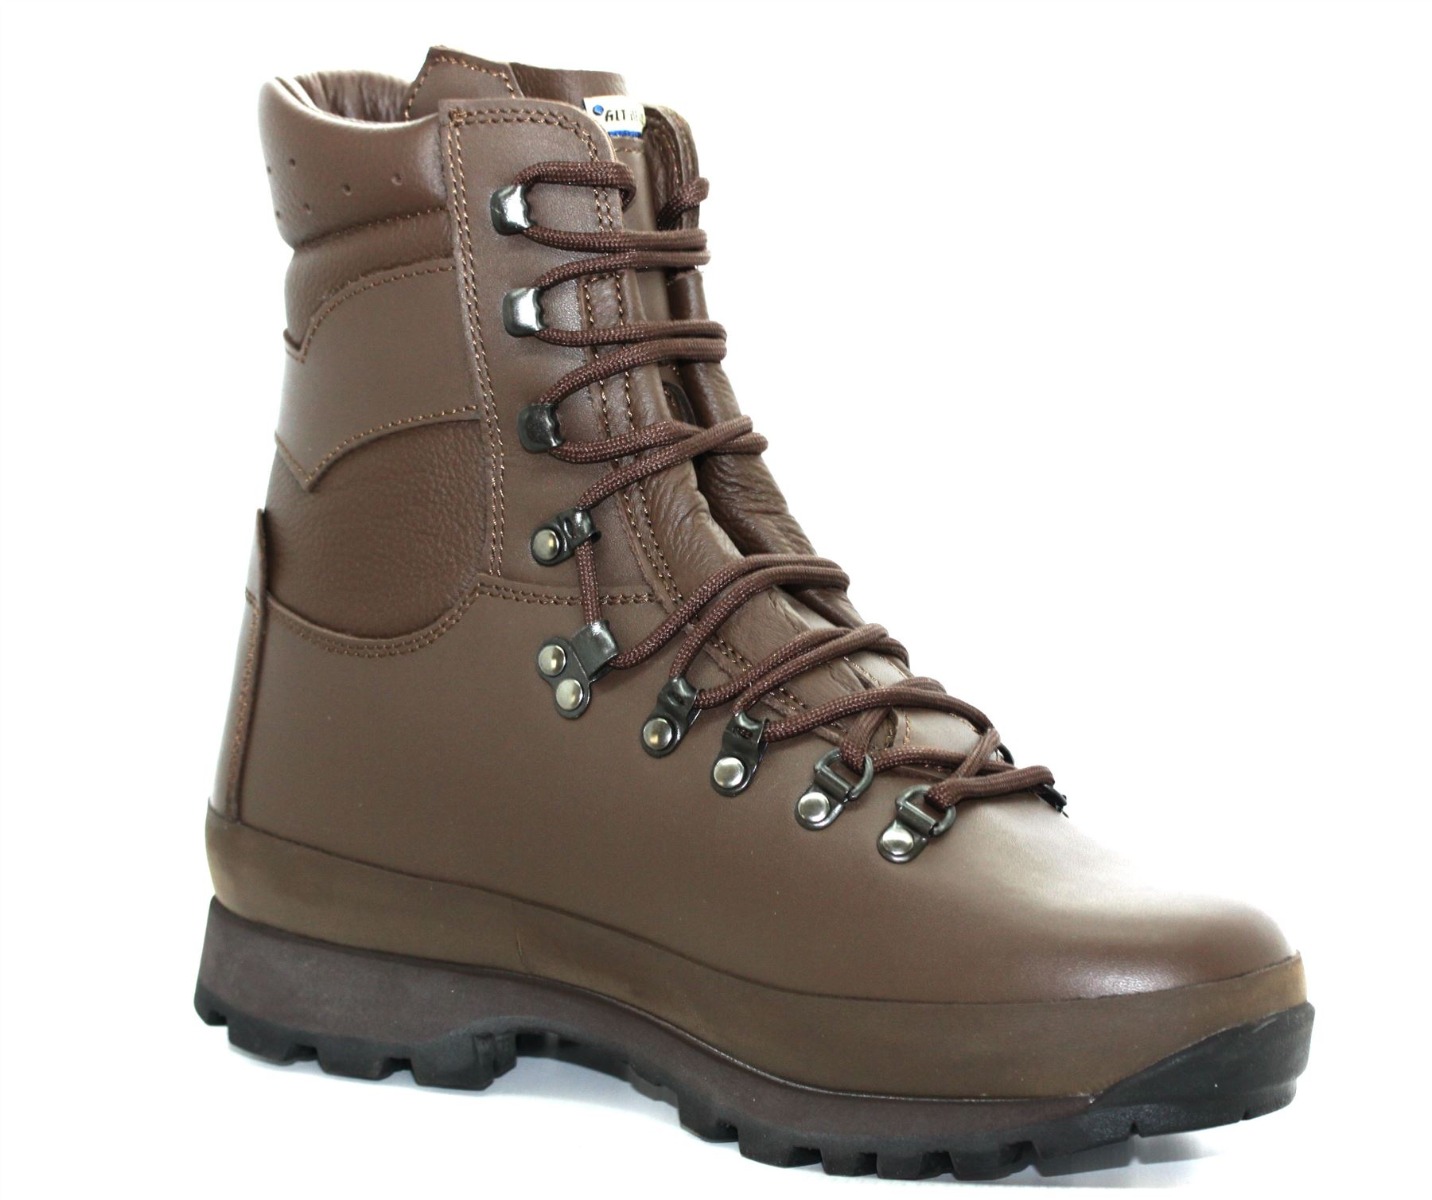 Altberg Defender High Liability Boots- From £29.99